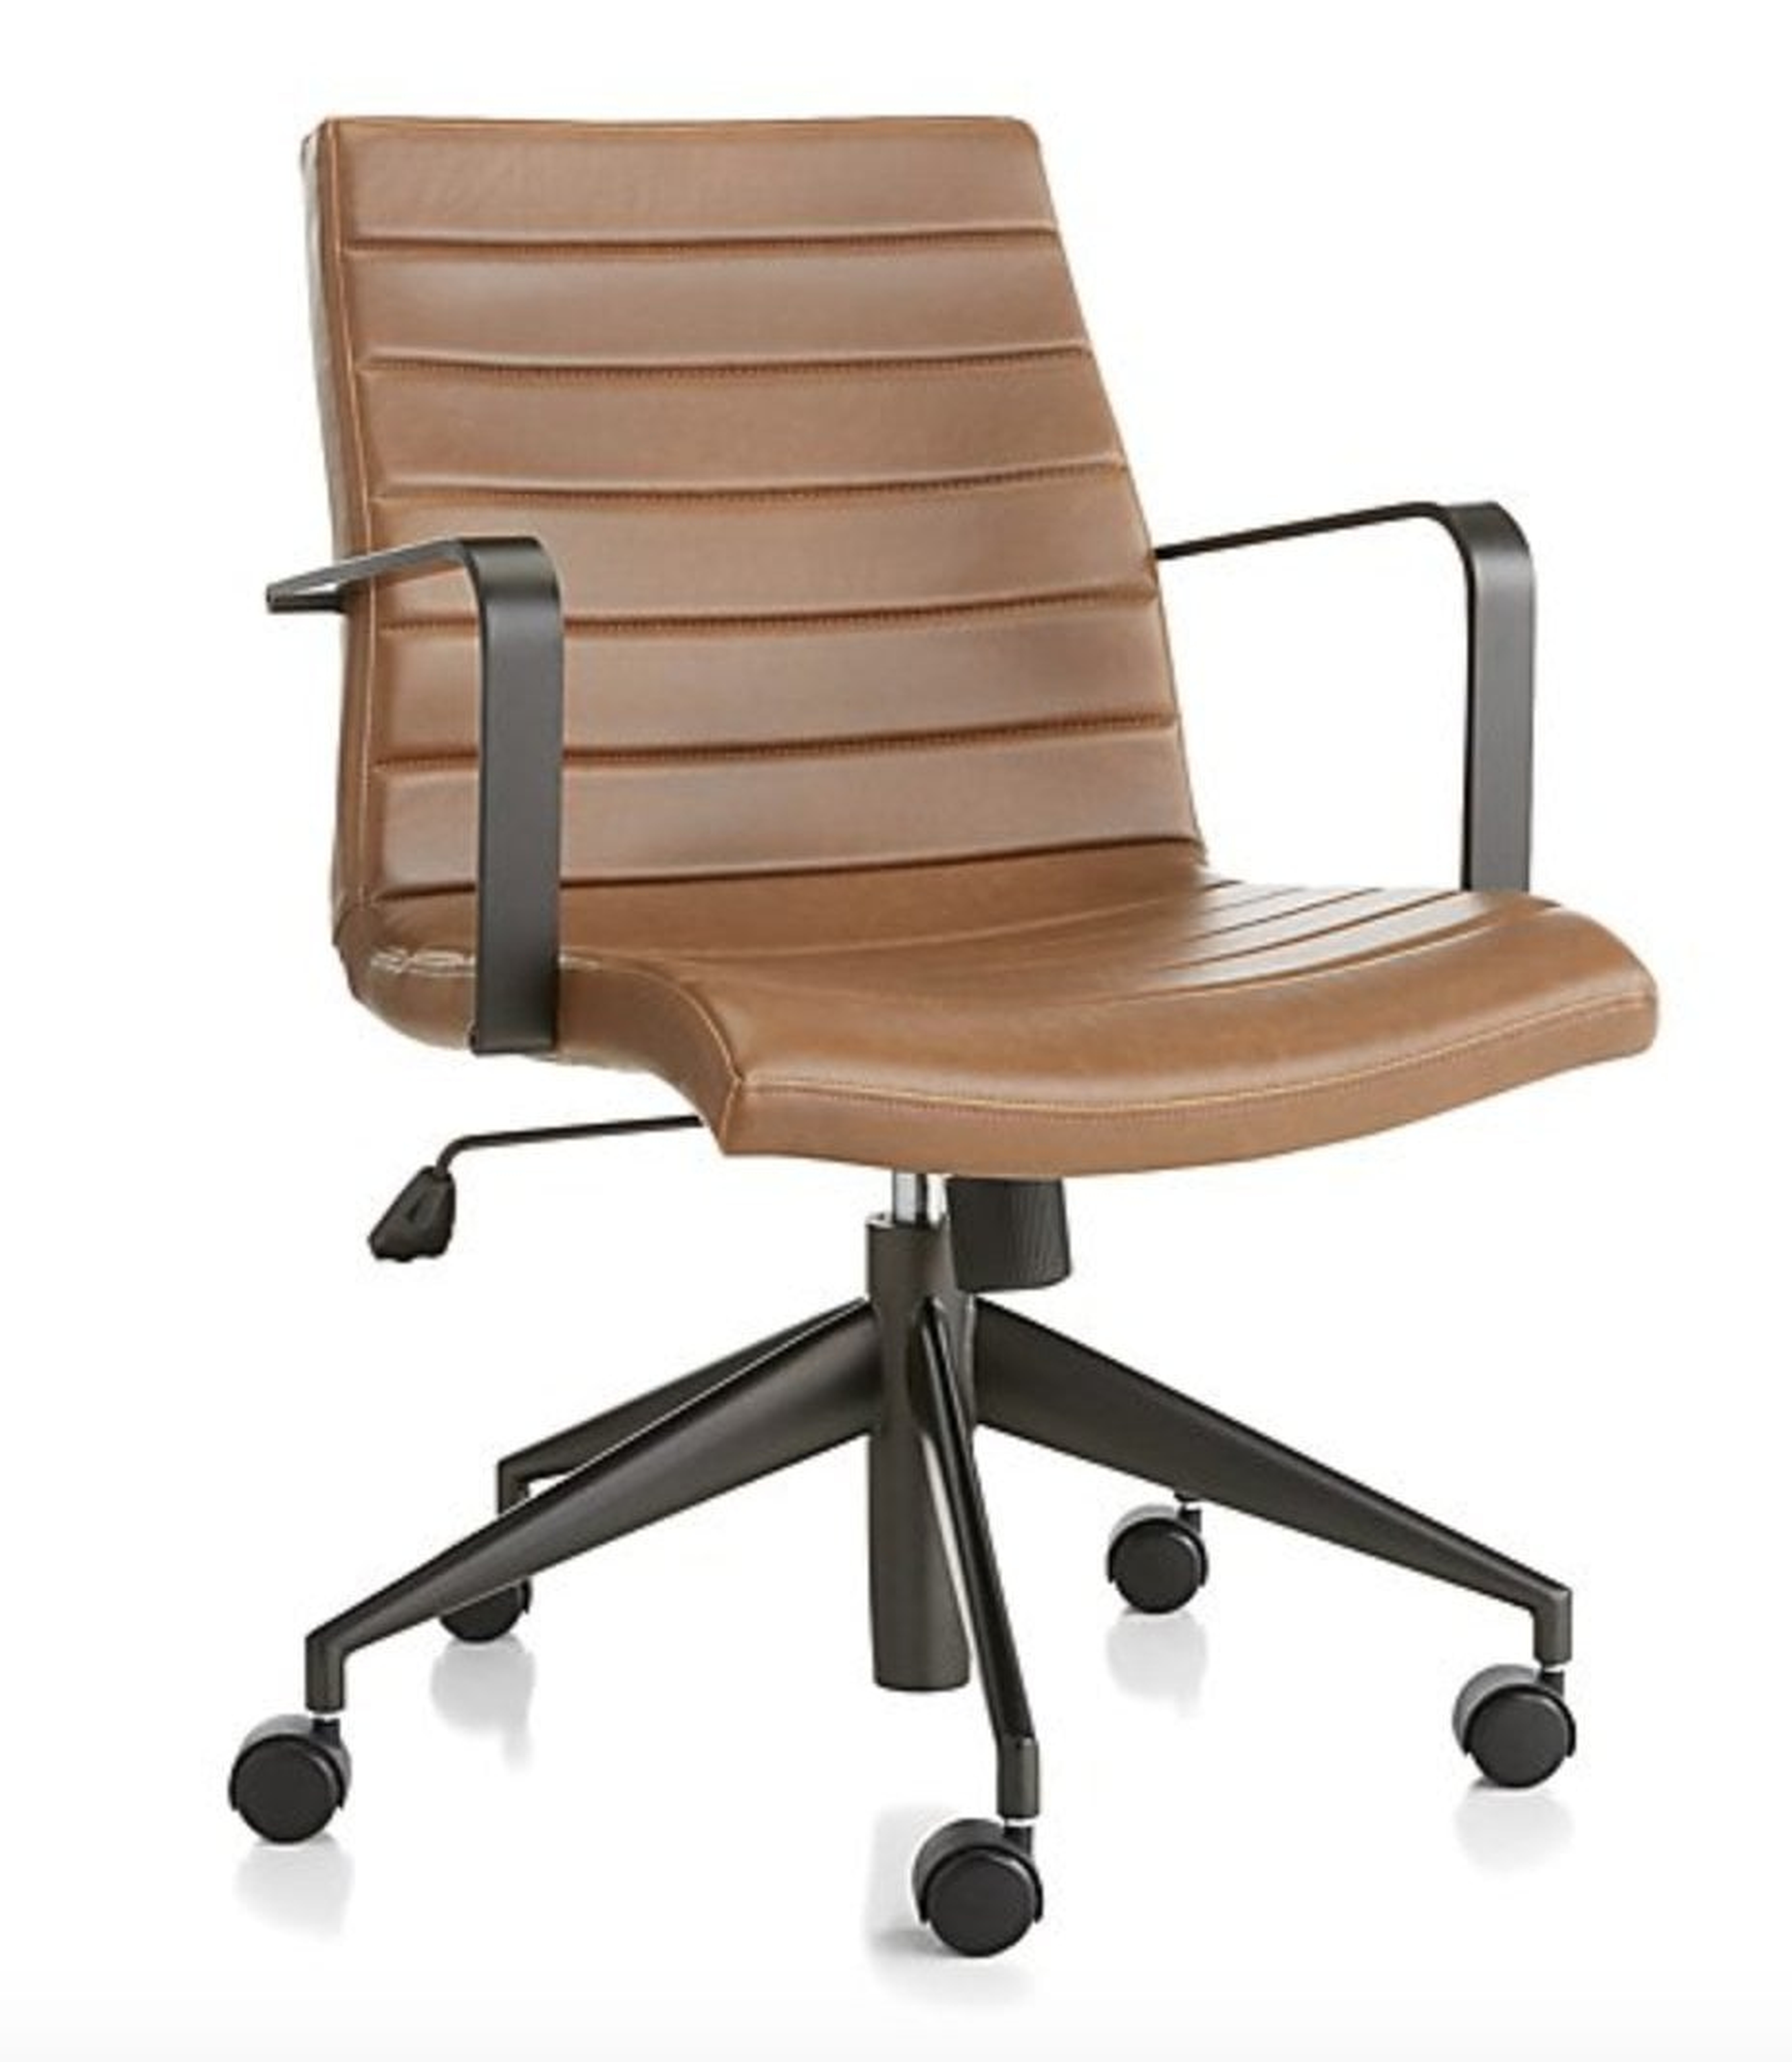 Graham Brown Synthetic Leather Desk Chair - Crate and Barrel